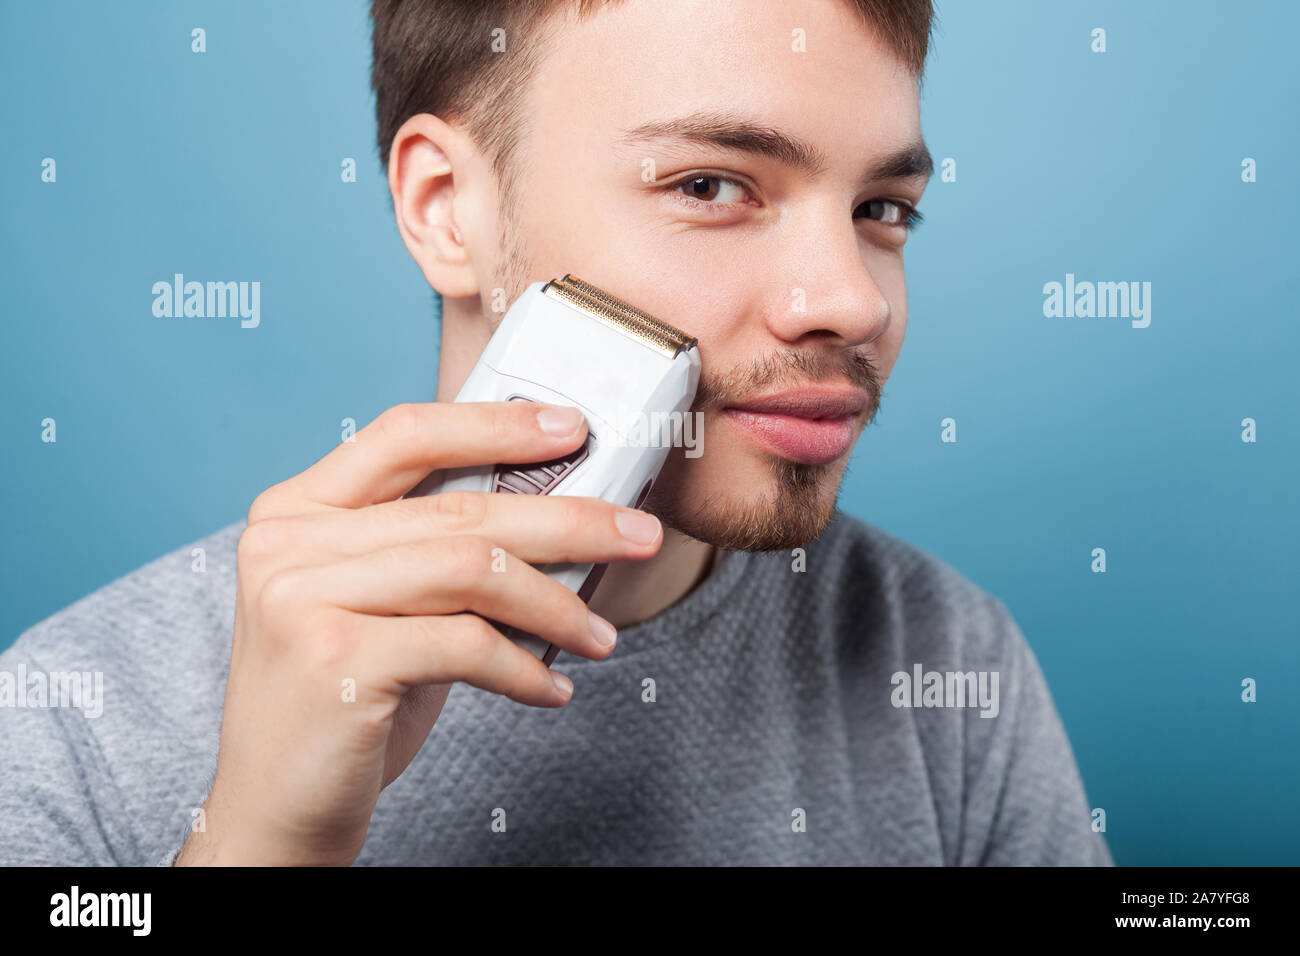 Portrait of happy brunette man with bristle and mustache using epilator to remove facial hair, smiling satisfied with soft skin, male beauty care conc Stock Photo